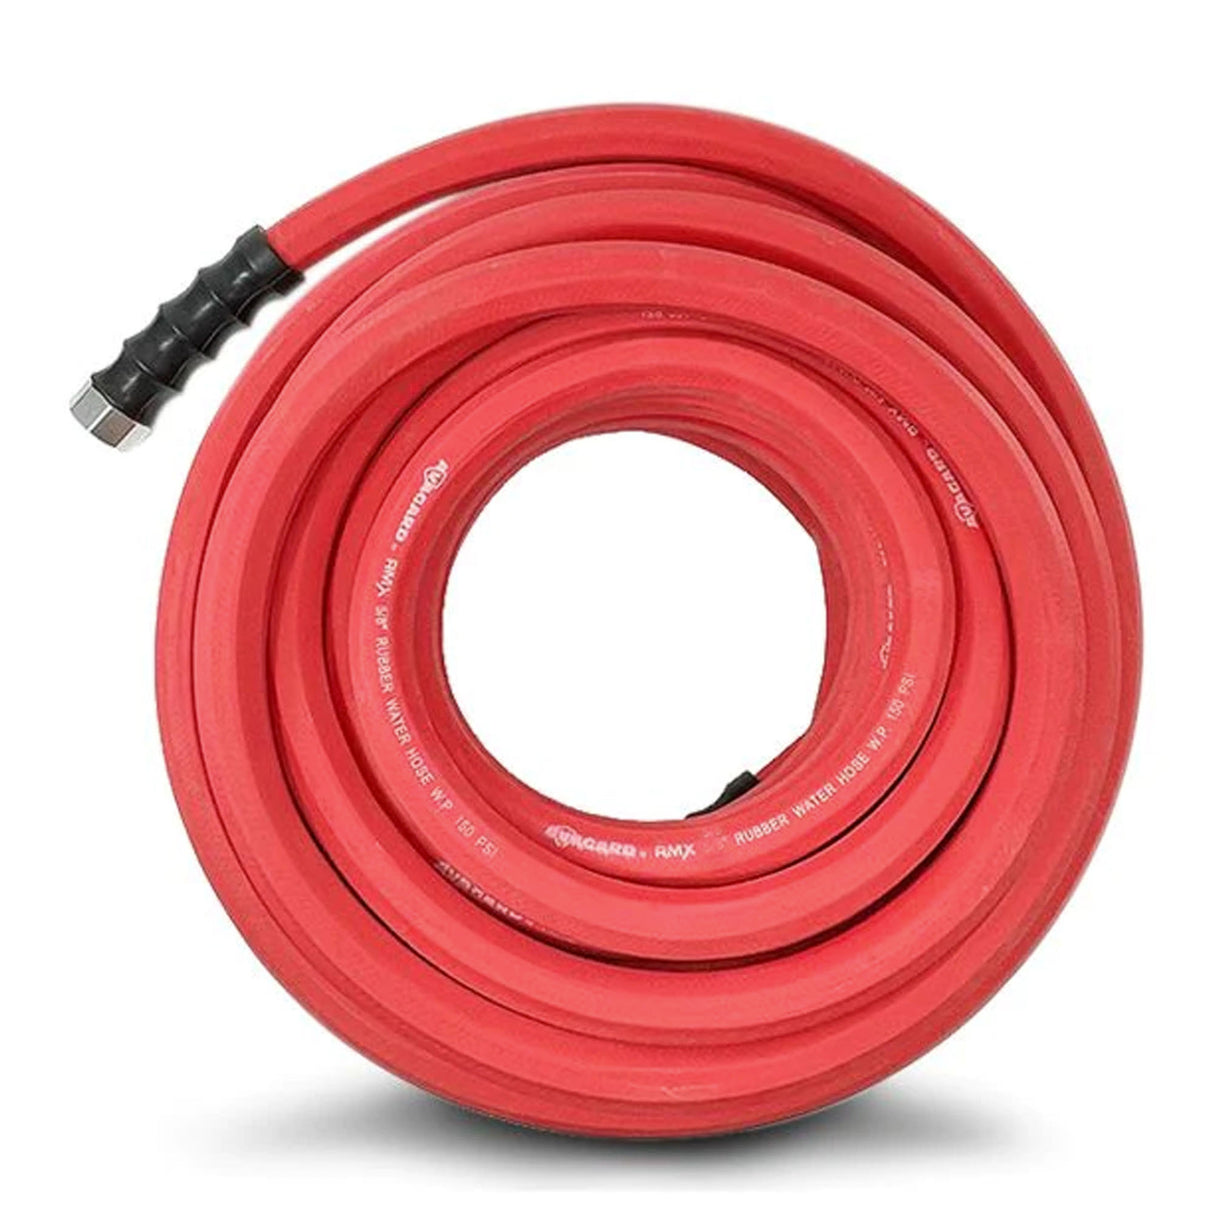 Avagard Rubber Water Hose 3/4